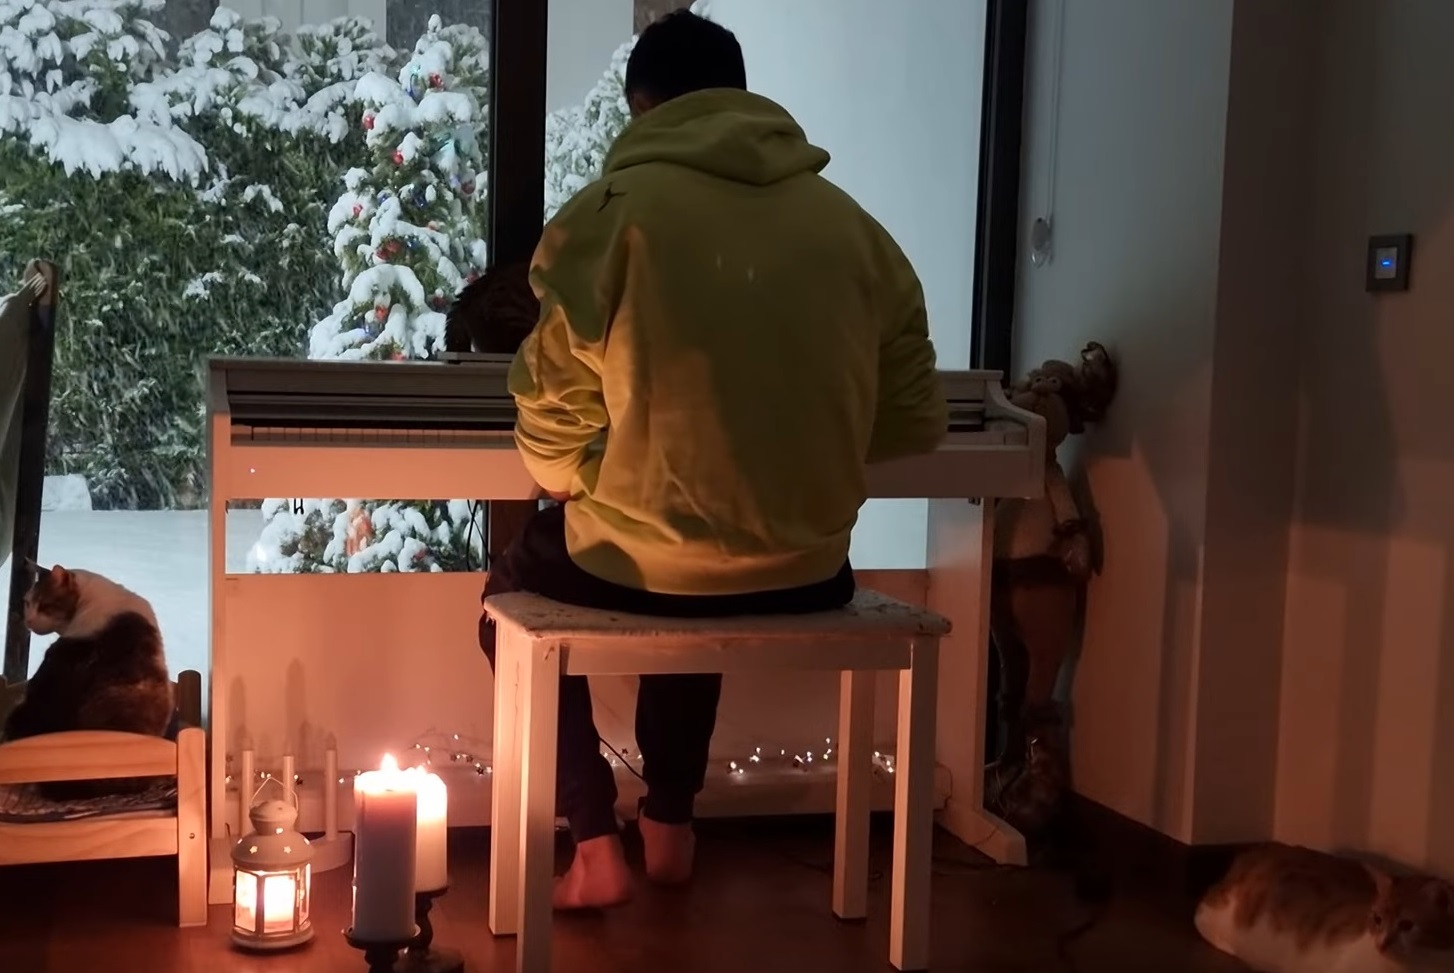 Playing Piano For His Cats On Snowy Day